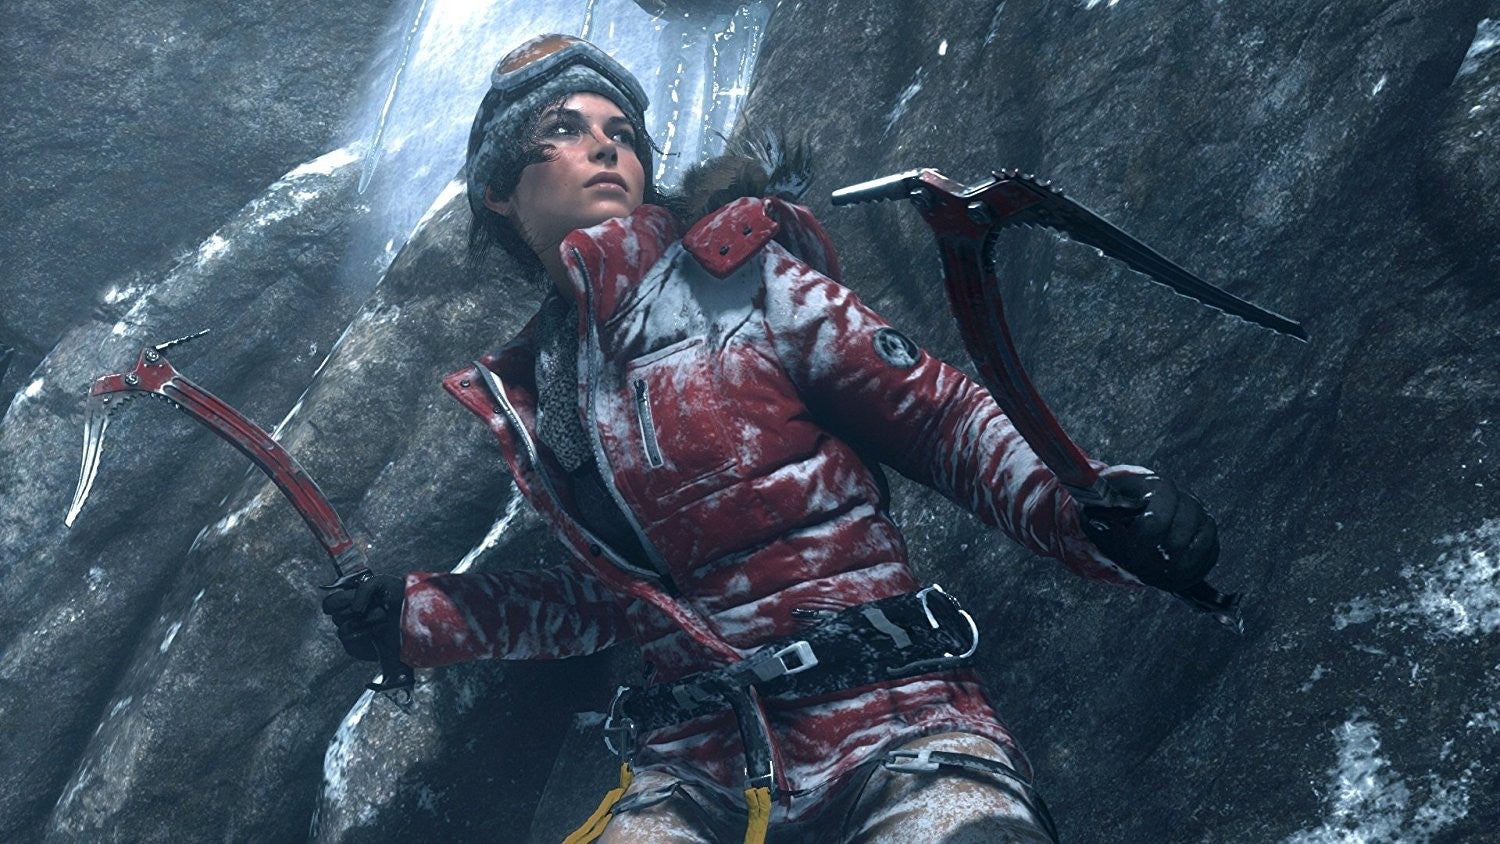 Image for Tomb Raider film and TV series reportedly in the works at Amazon